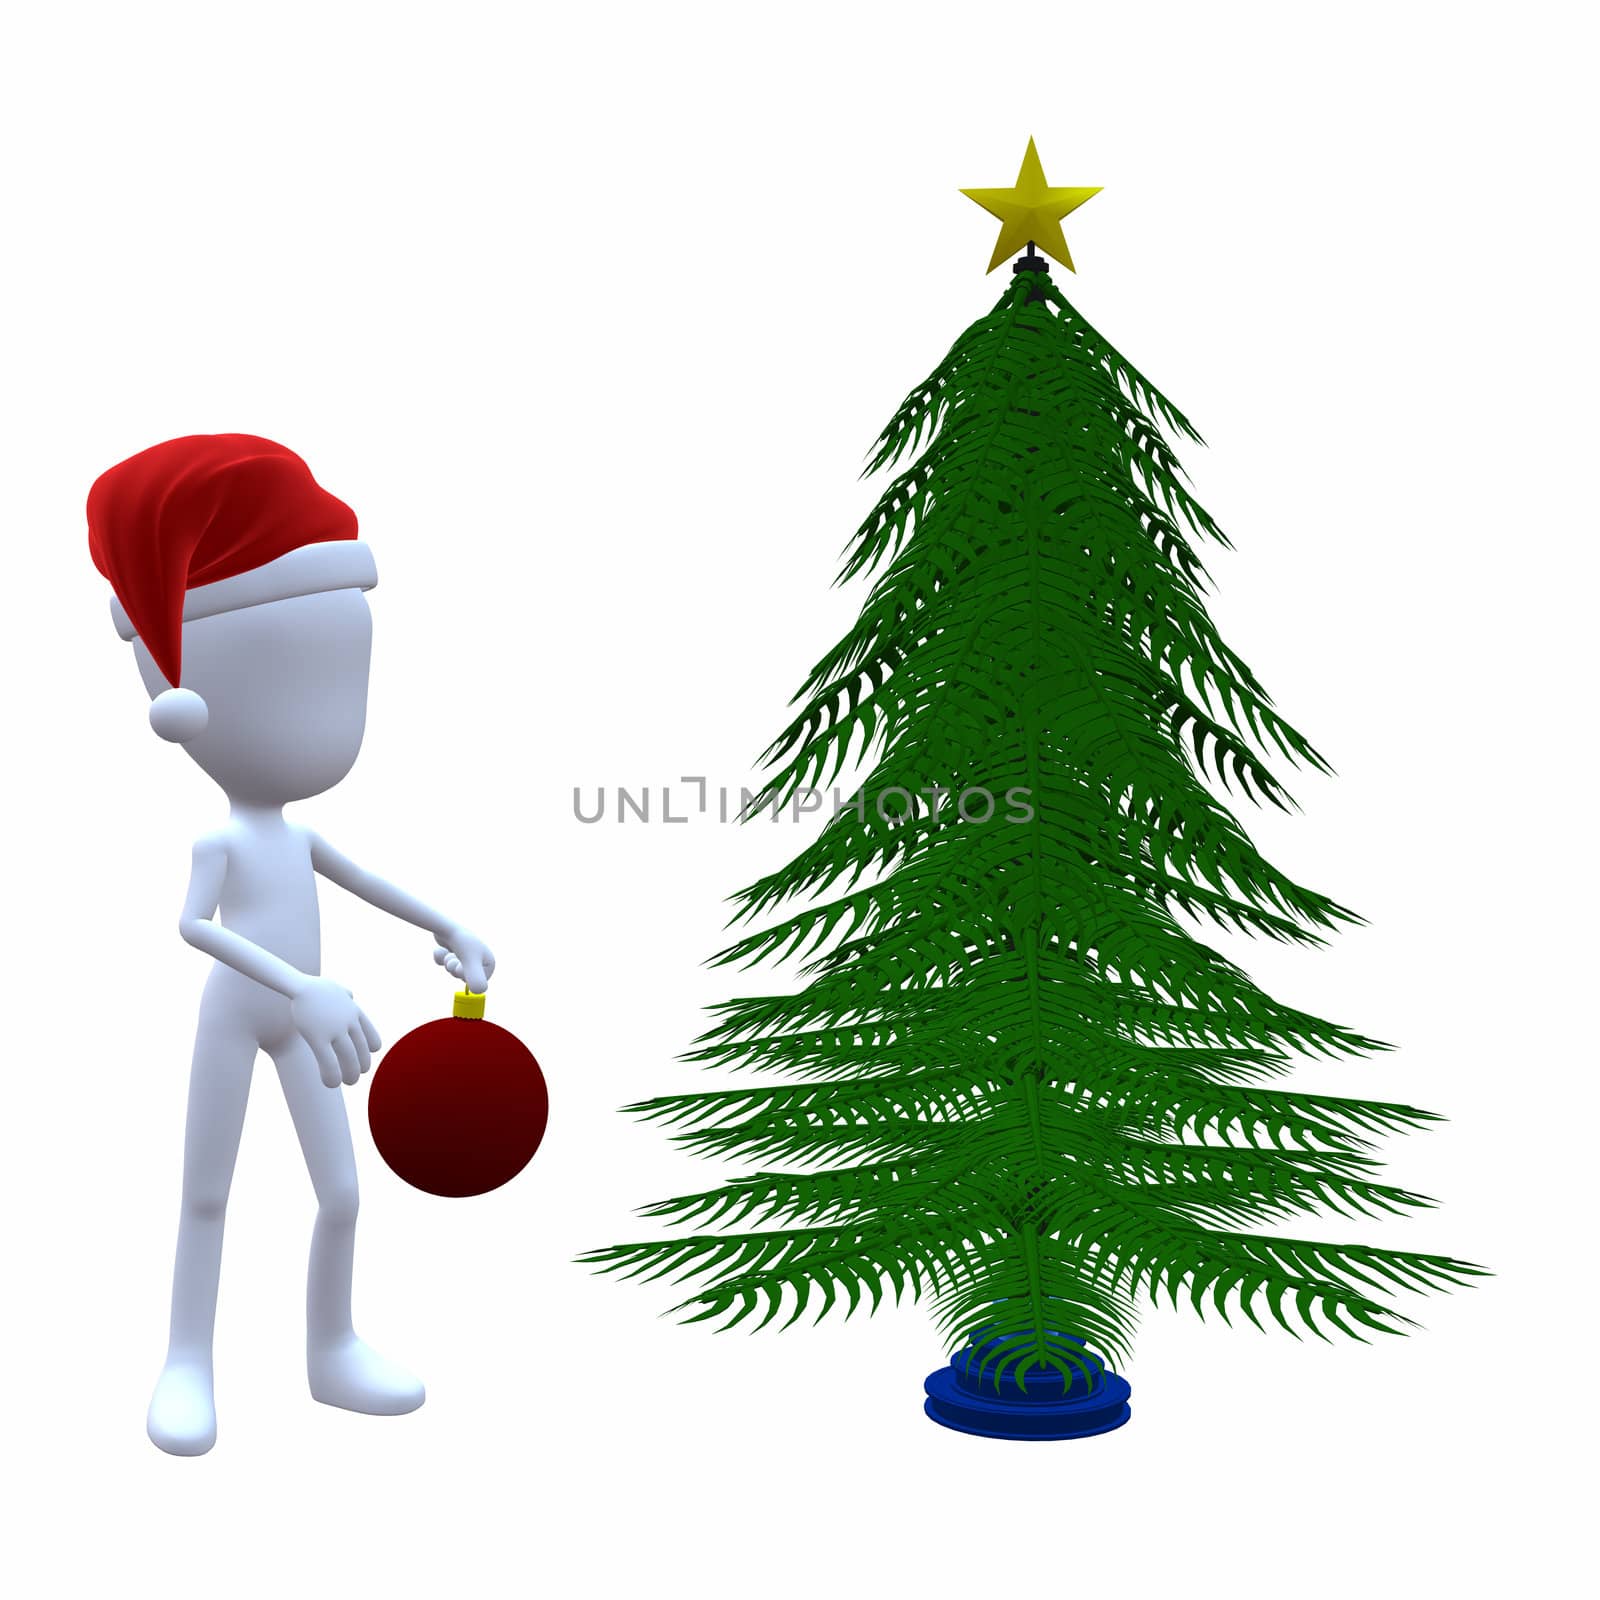 3D Christmas Guy With A Christmas Tree by kathygold